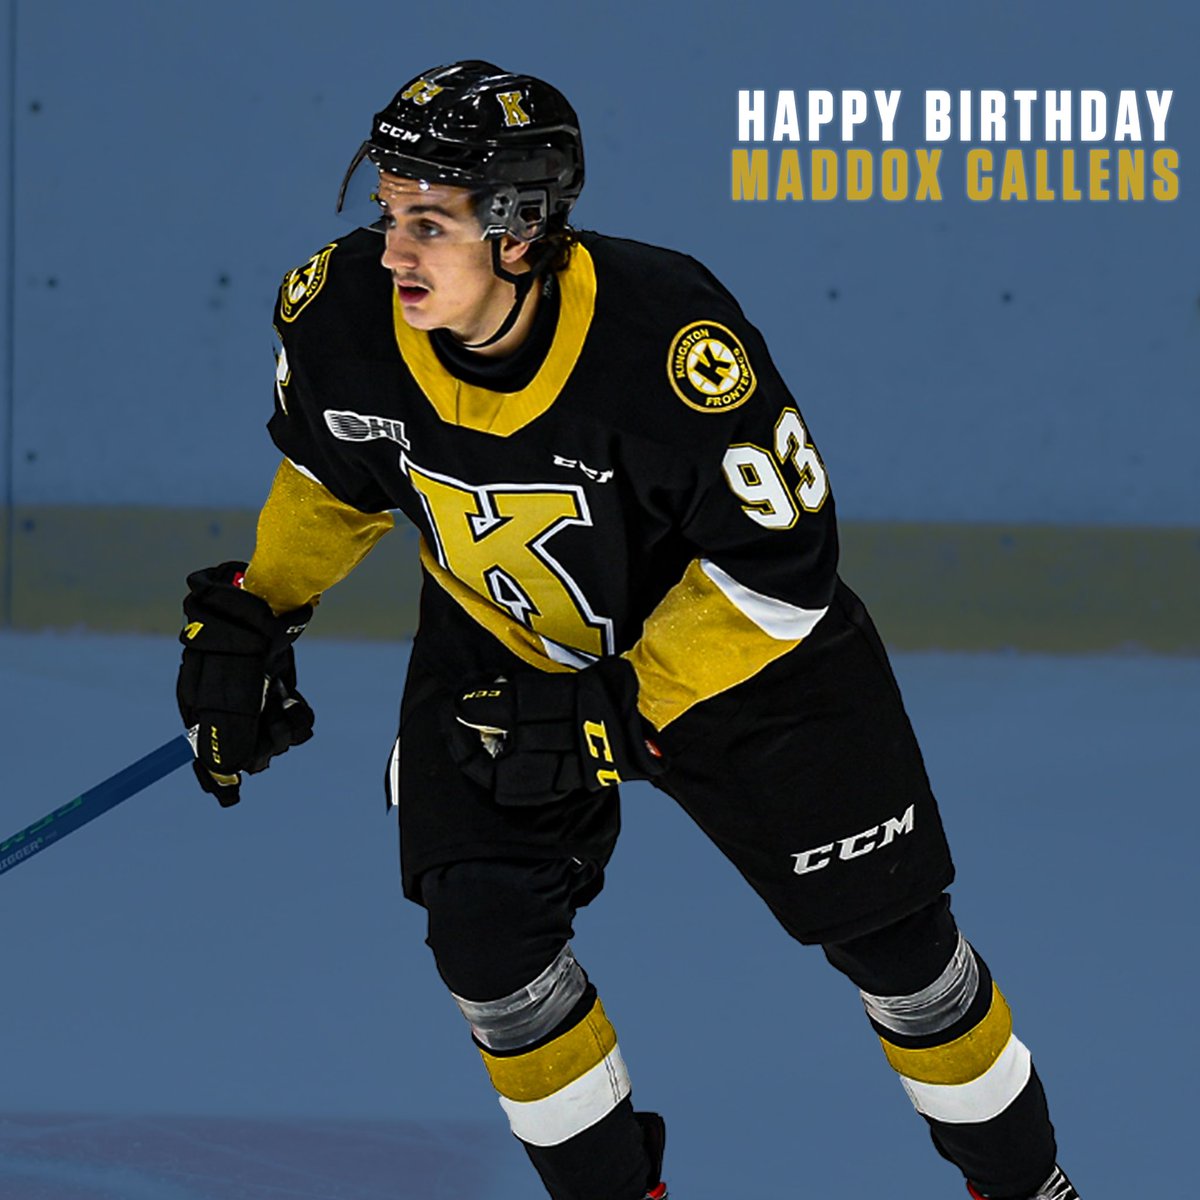 Sending our best wishes to @MaddoxCallens on his 20th birthday today! 🎉

#WDSE #FrontsHockey #OHL #Hockey #MaddoxCallens